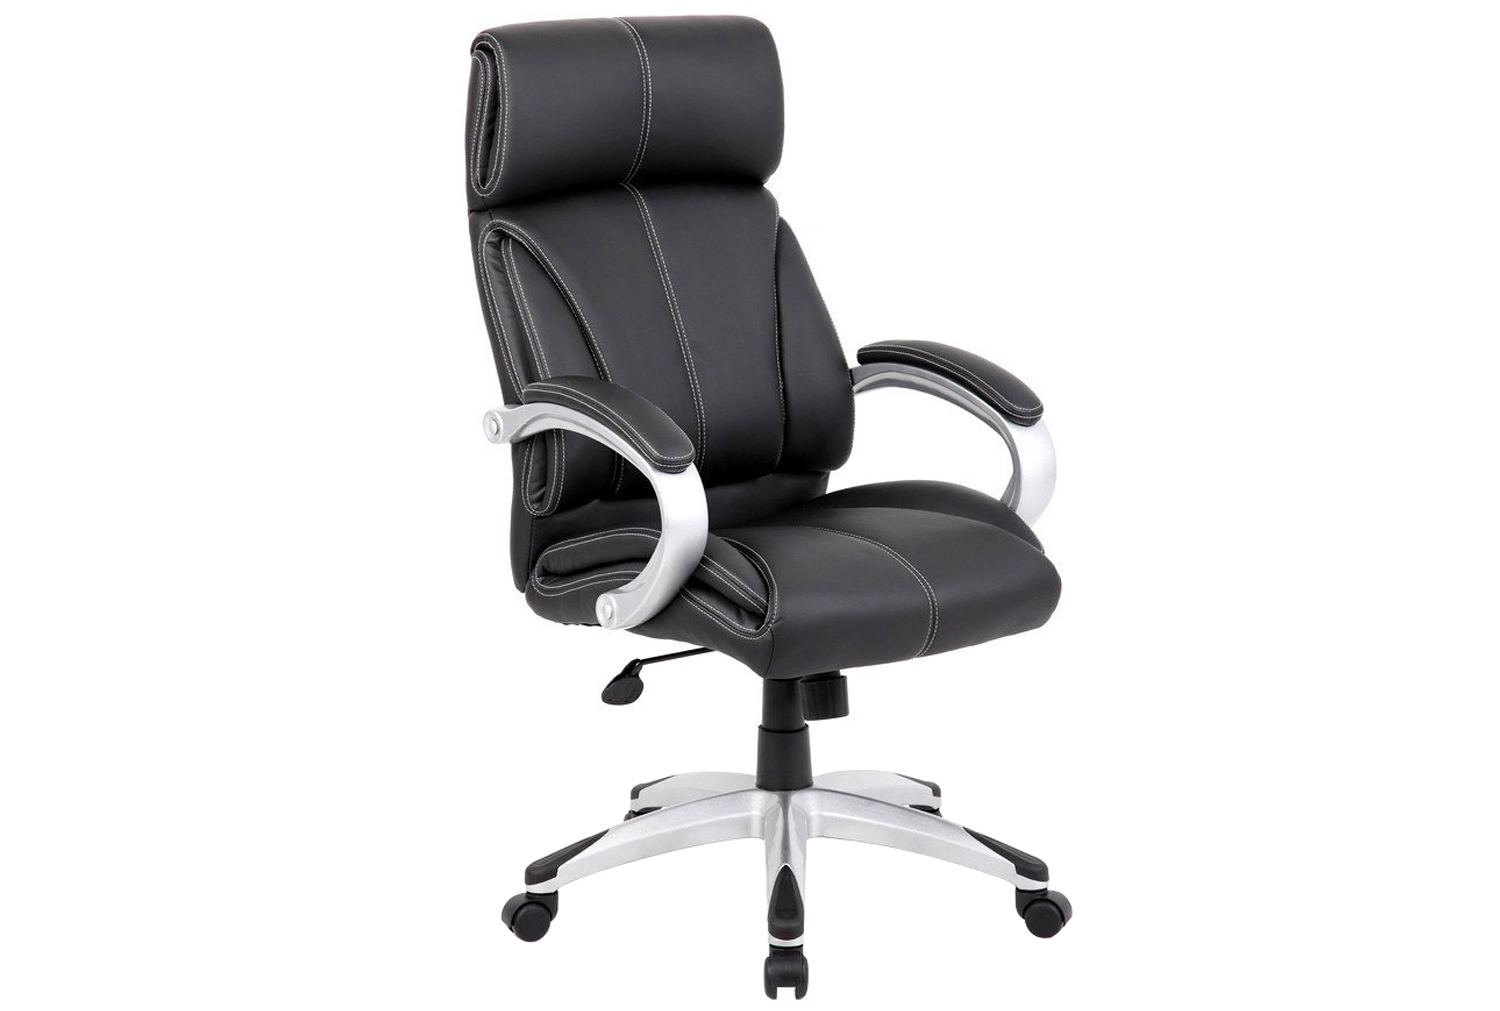 Beckett High Back Executive Office Chair, Black, Express Delivery